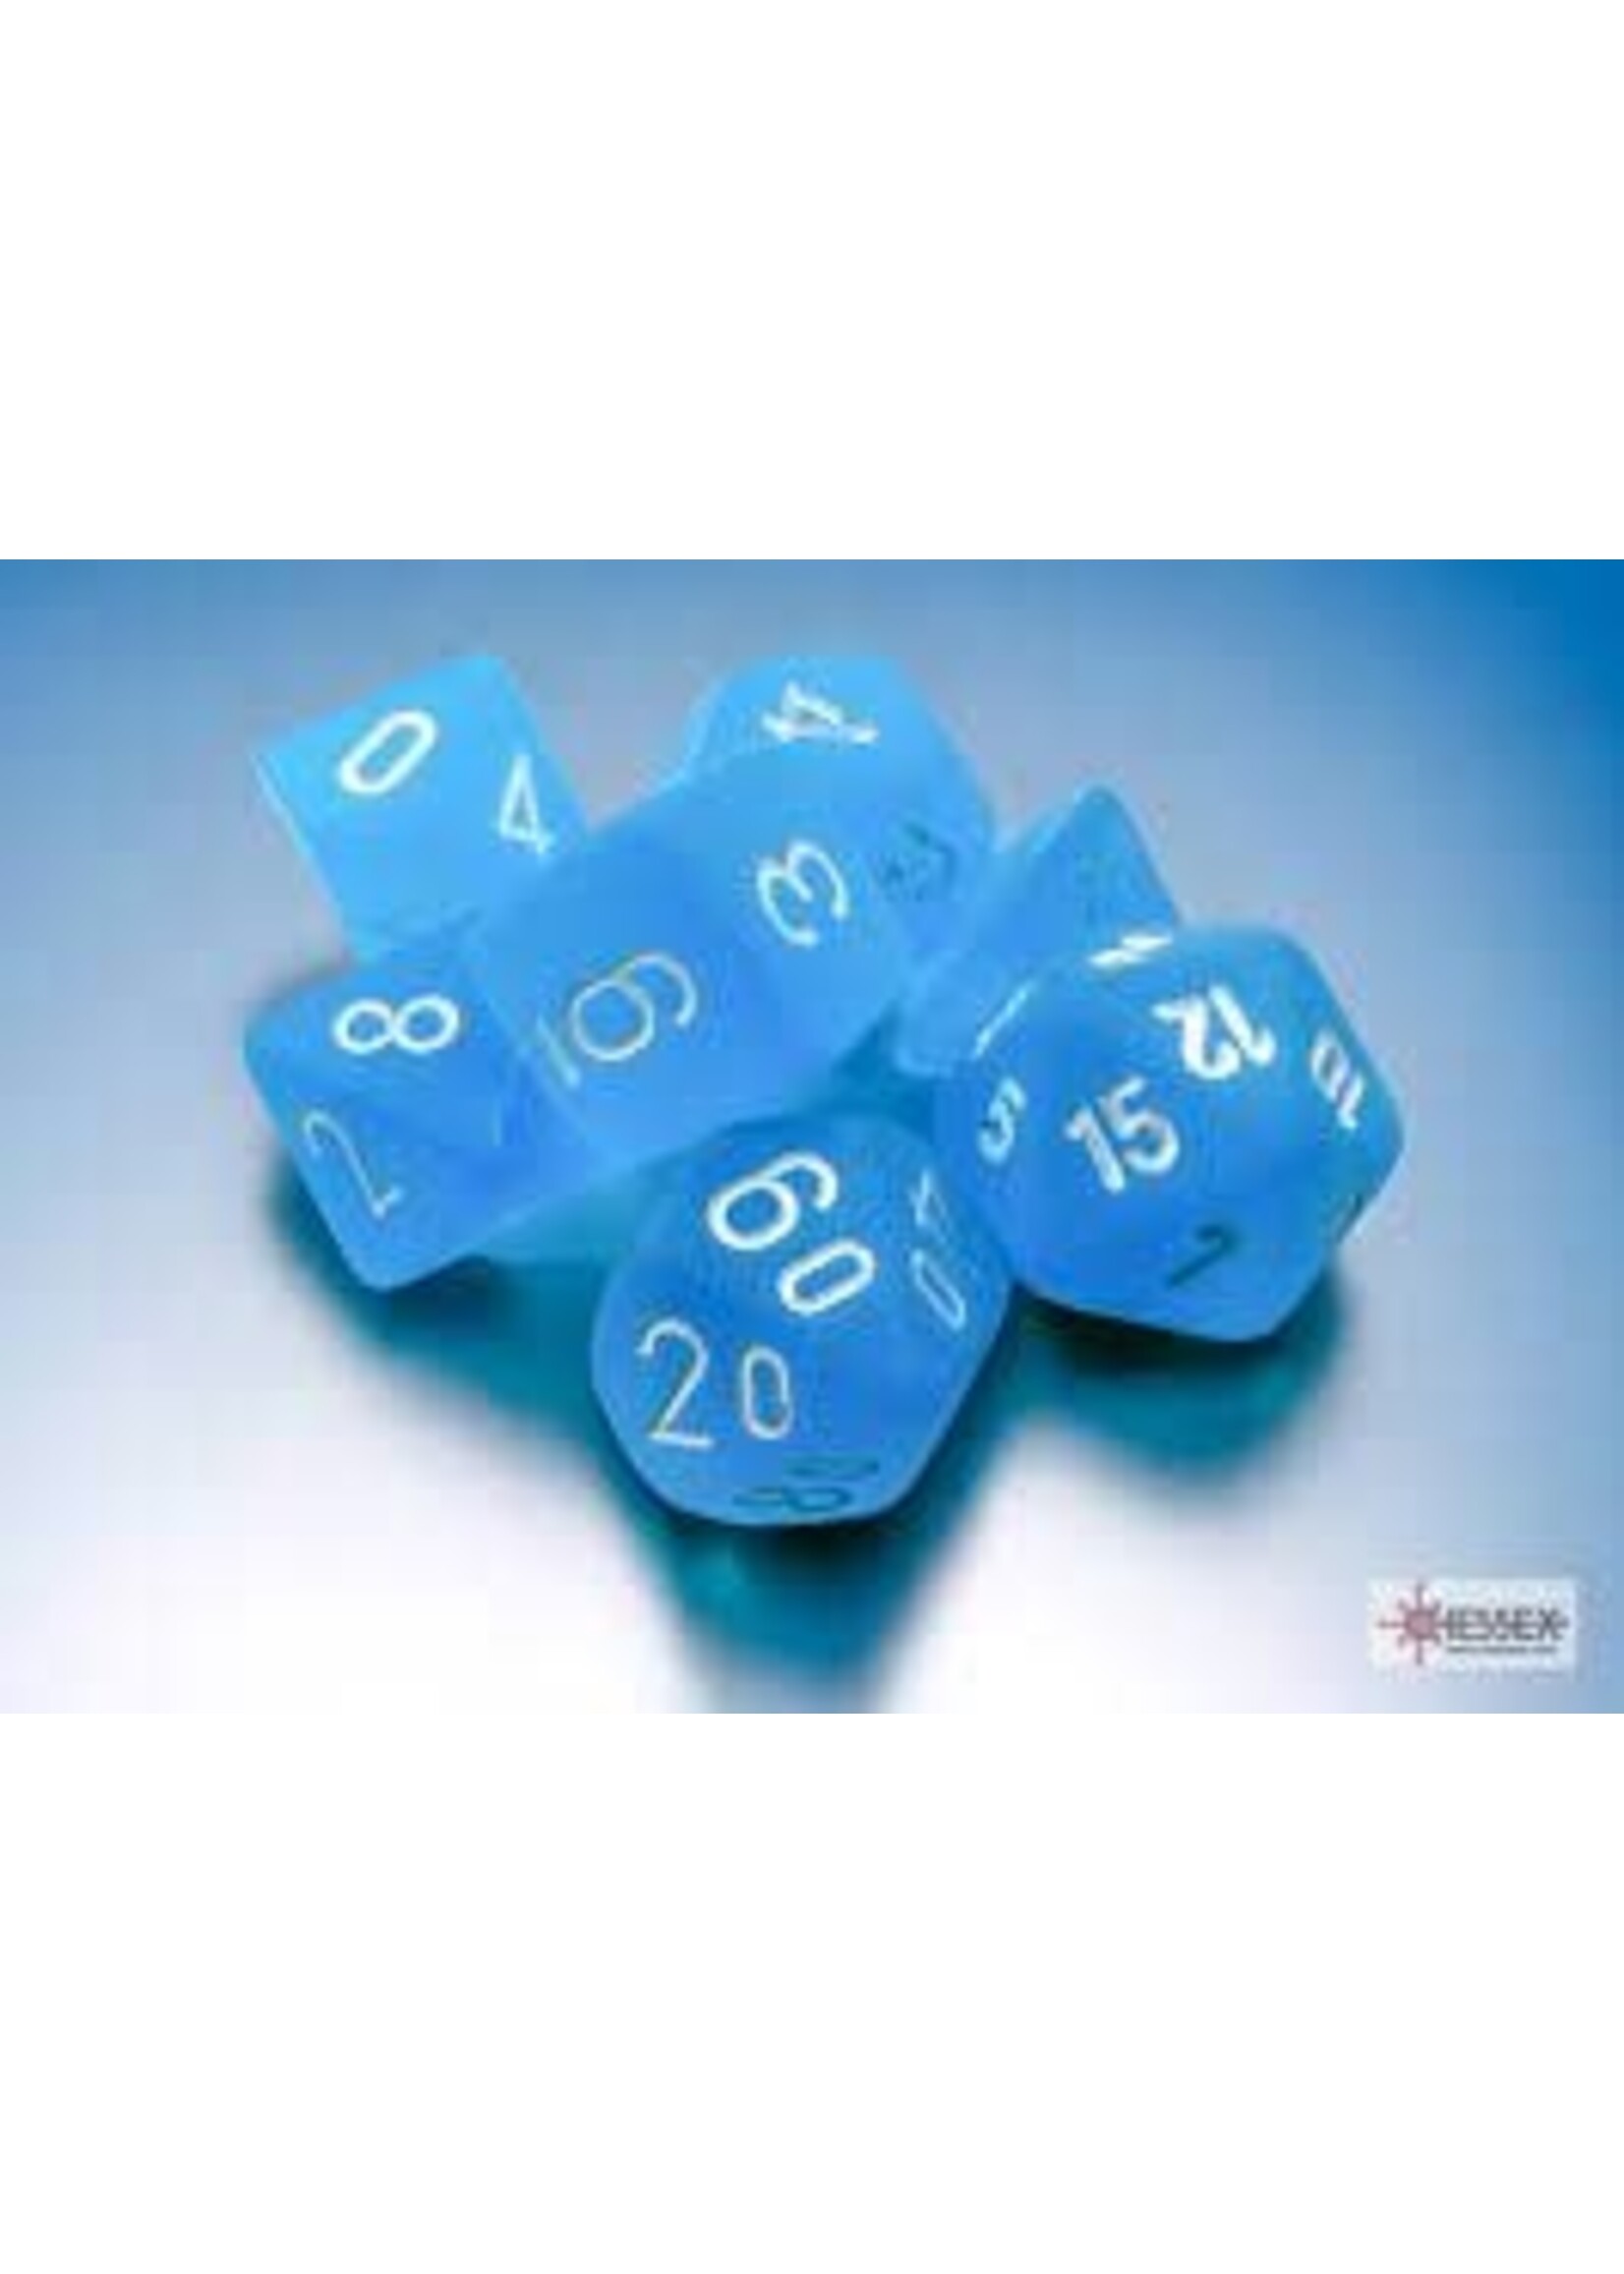 Chessex Frosted Mini 7 Set: Caribbean Blue w/ white